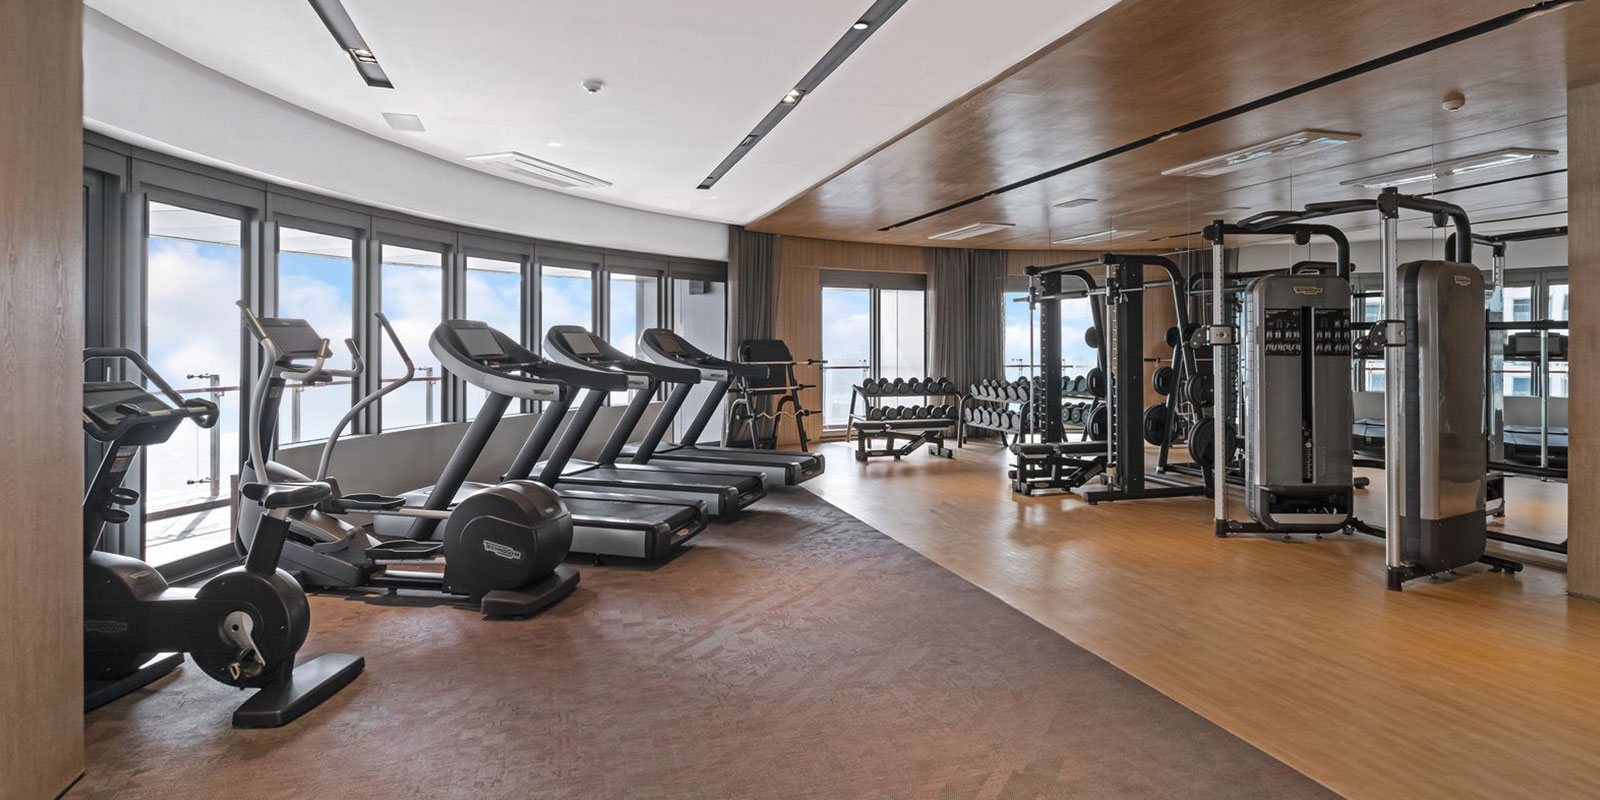 Spacious fitness suite packed with state-of-the-art equipment designed to ensure maximum efficiency and the best results with your workout.